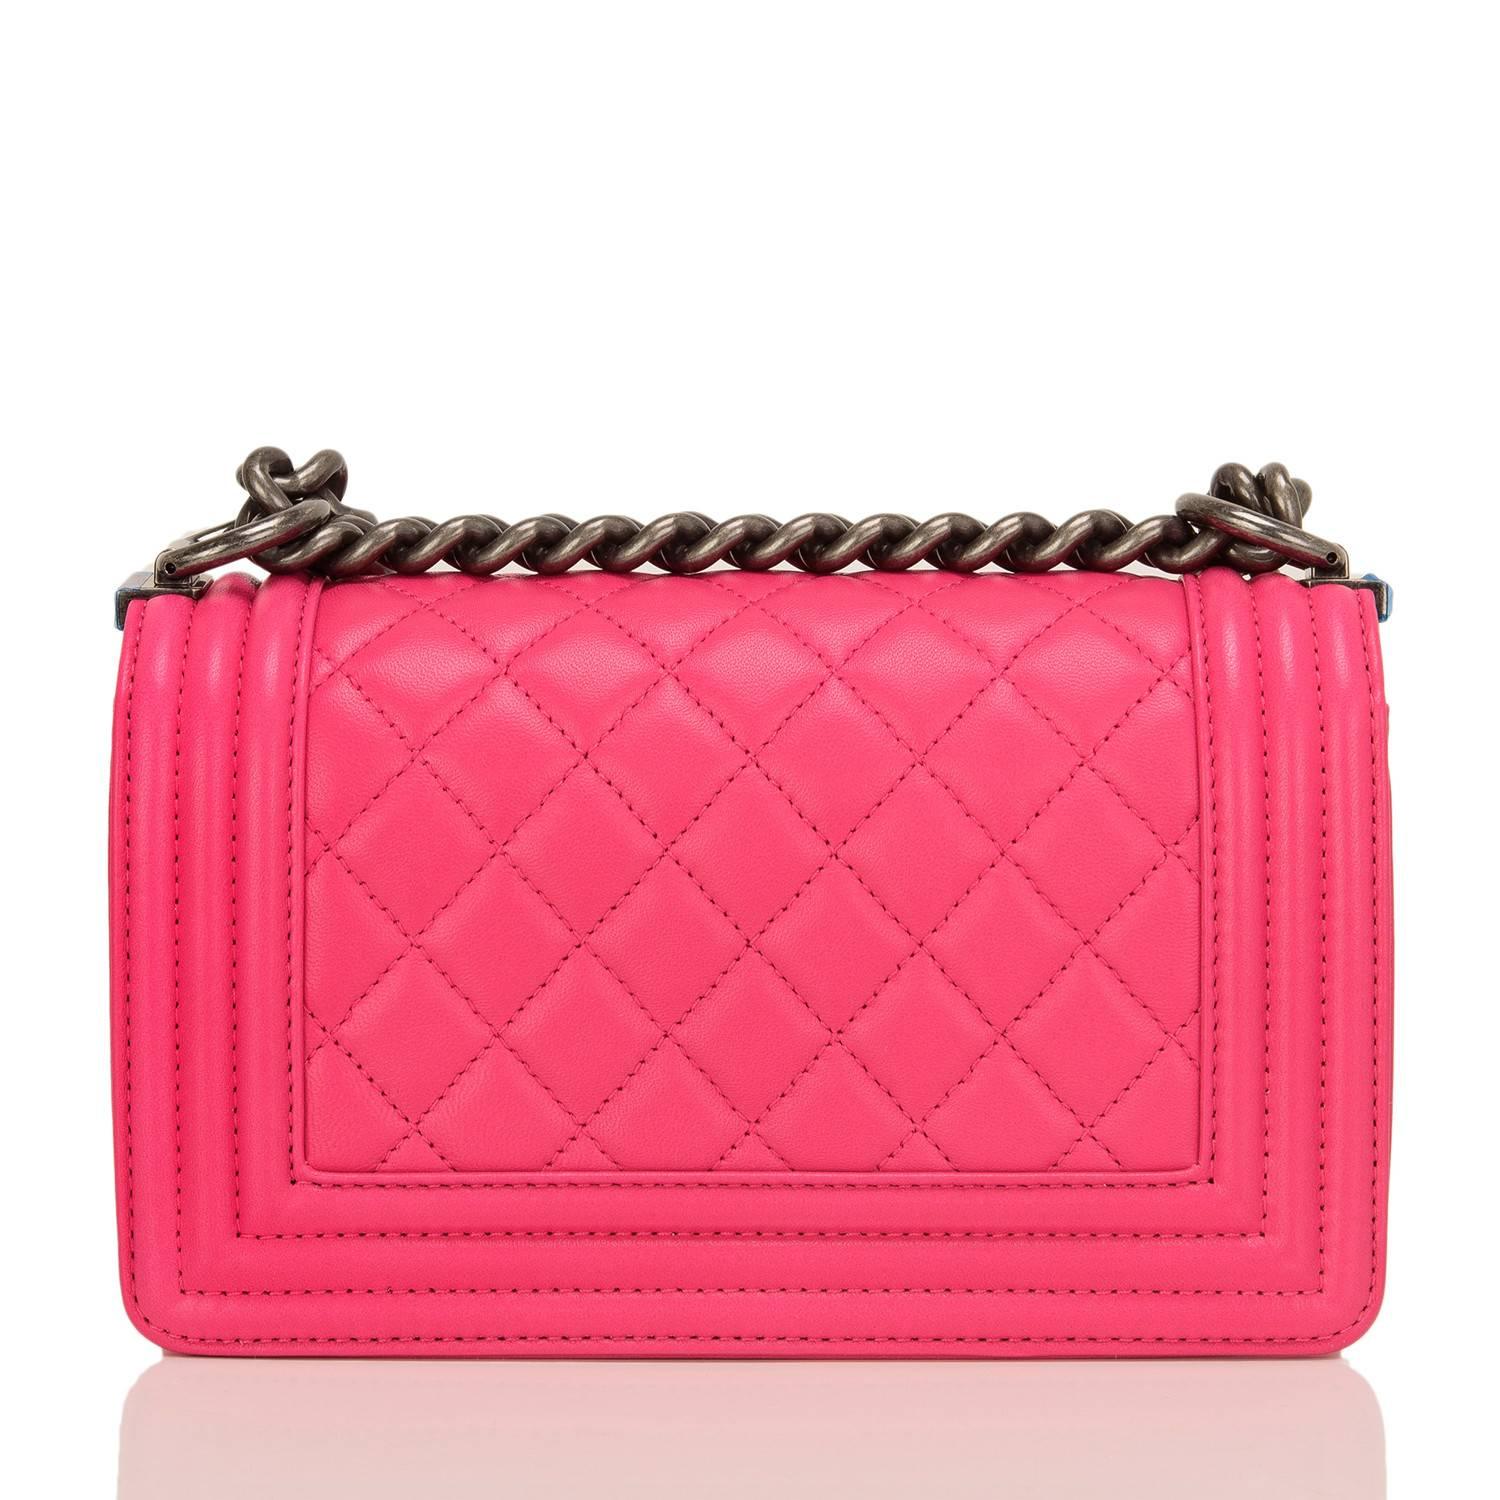 Chanel Fuchsia Pink Quilted Lambskin Small Boy Bag In New Condition For Sale In New York, NY